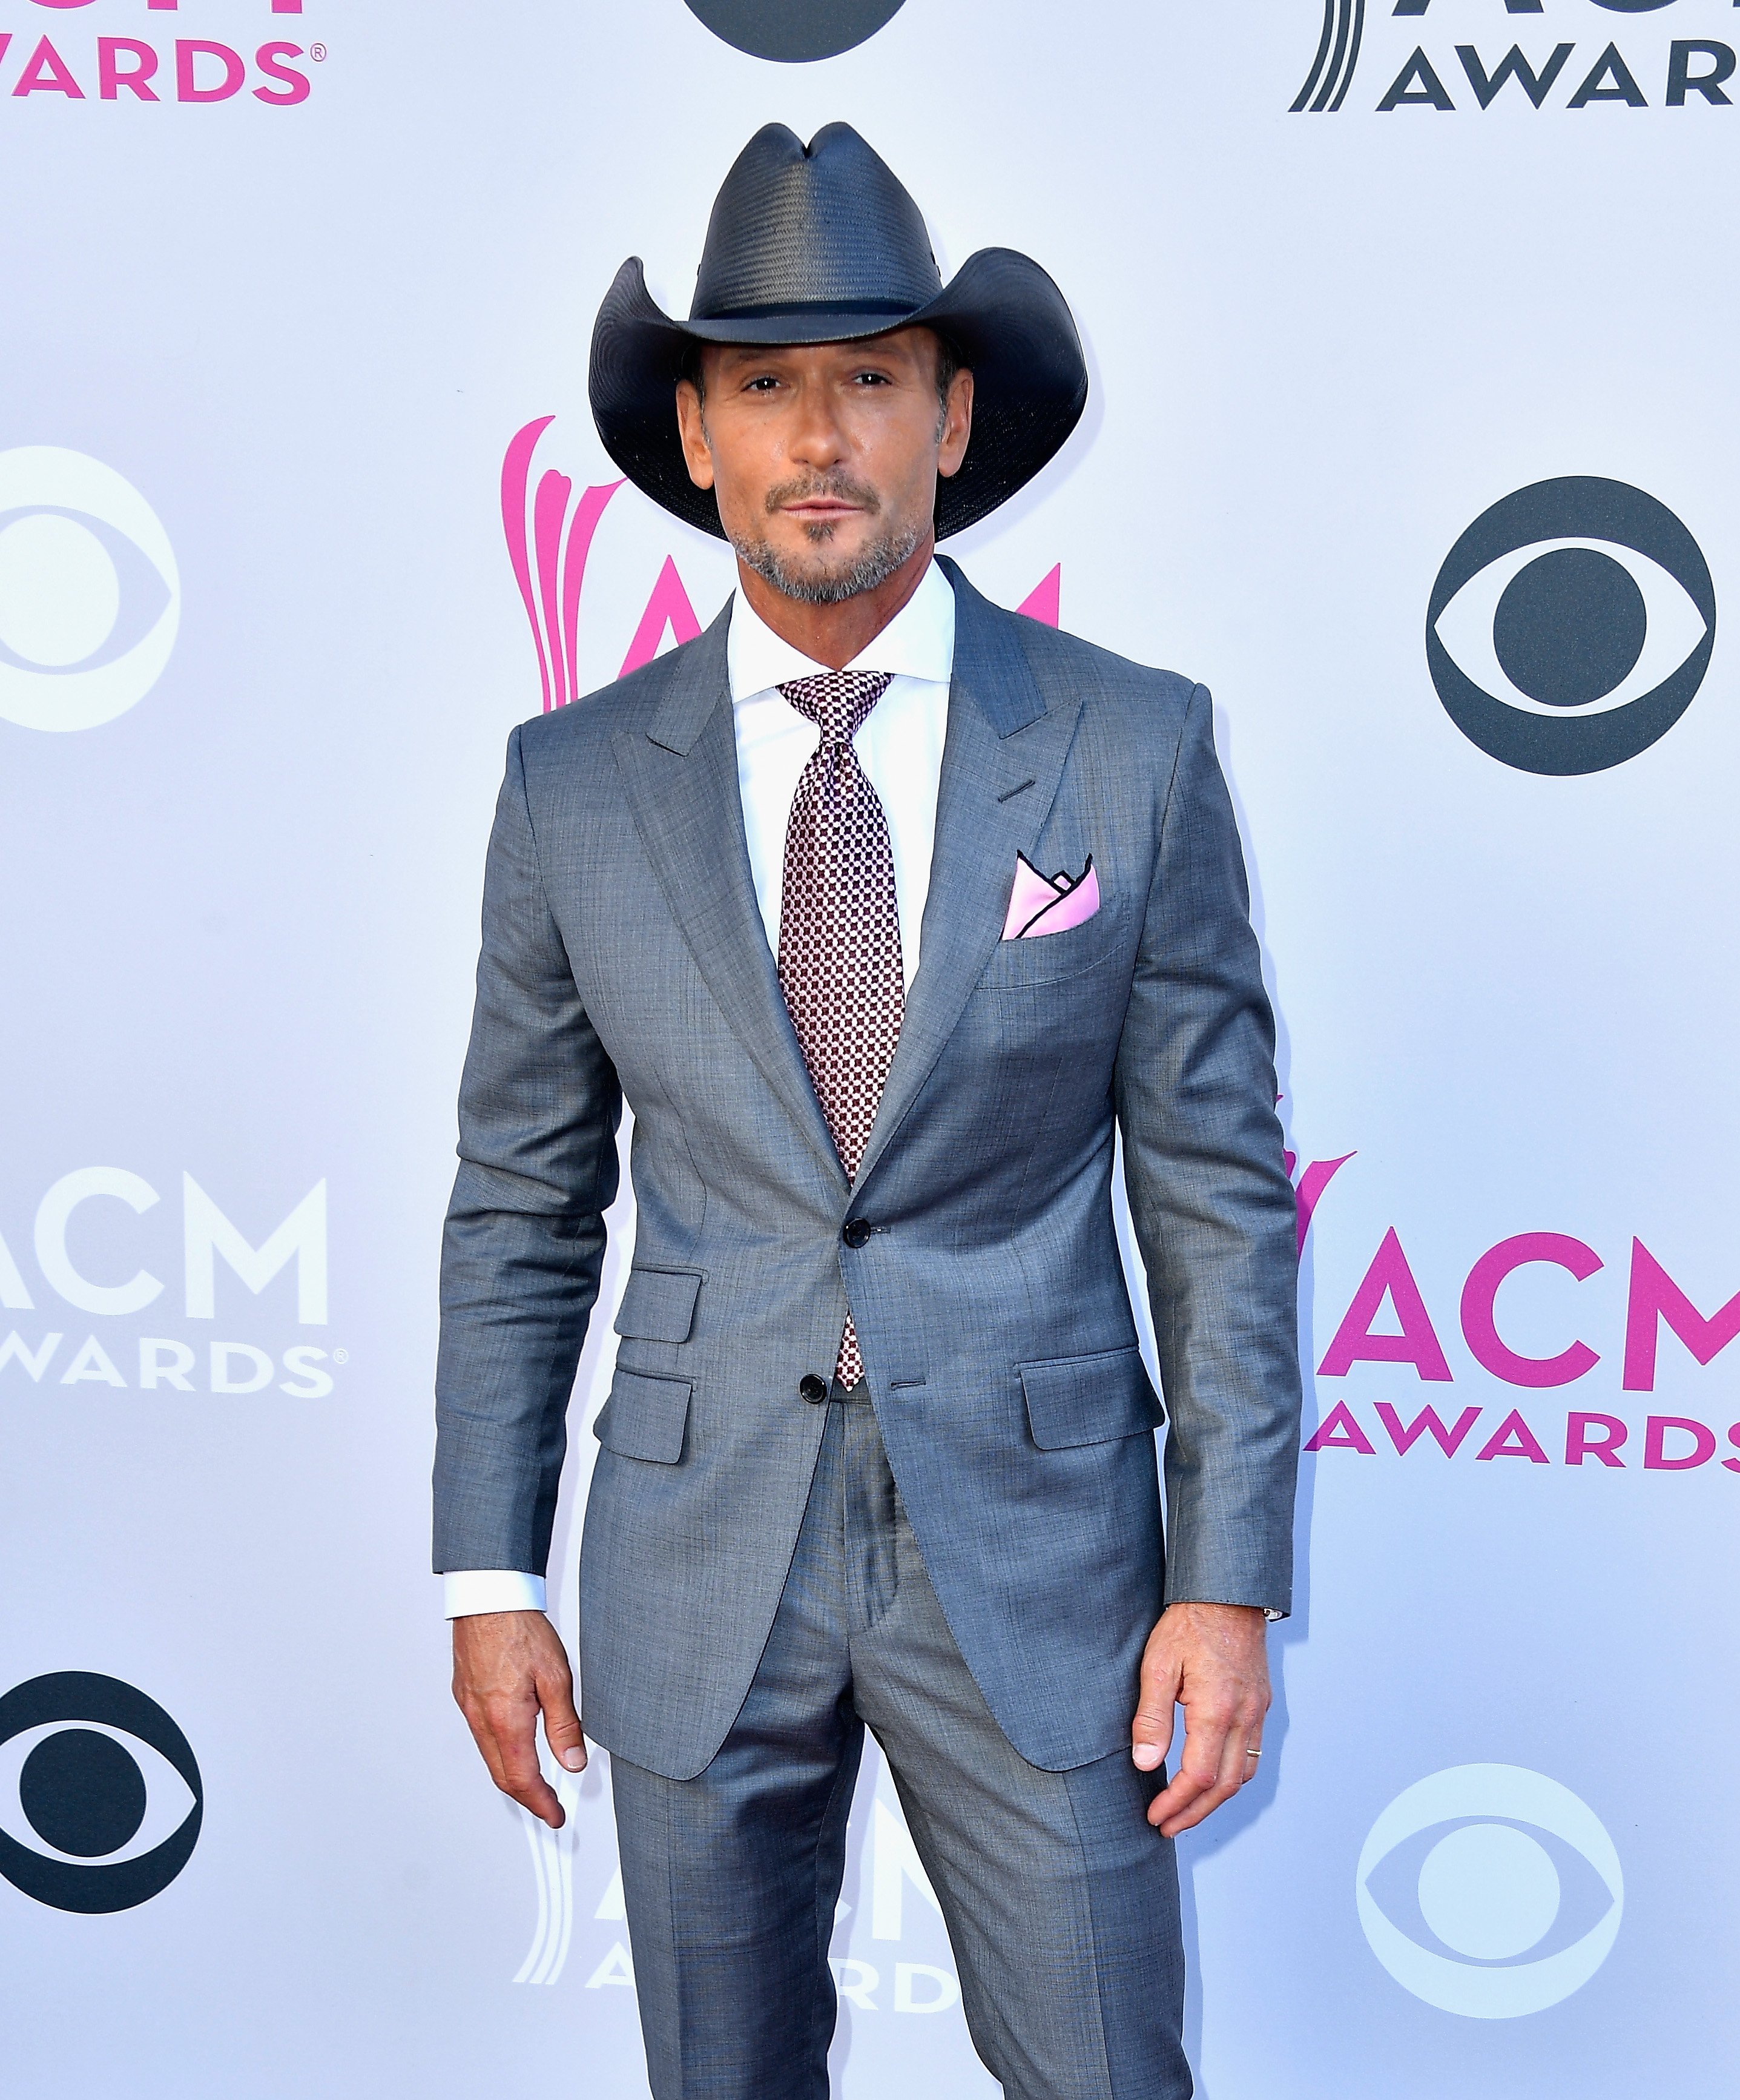 Tim McGraw attends the 52nd Academy Of Country Music Awards at Toshiba Plaza on April 2, 2017. | Photo: GettyImages